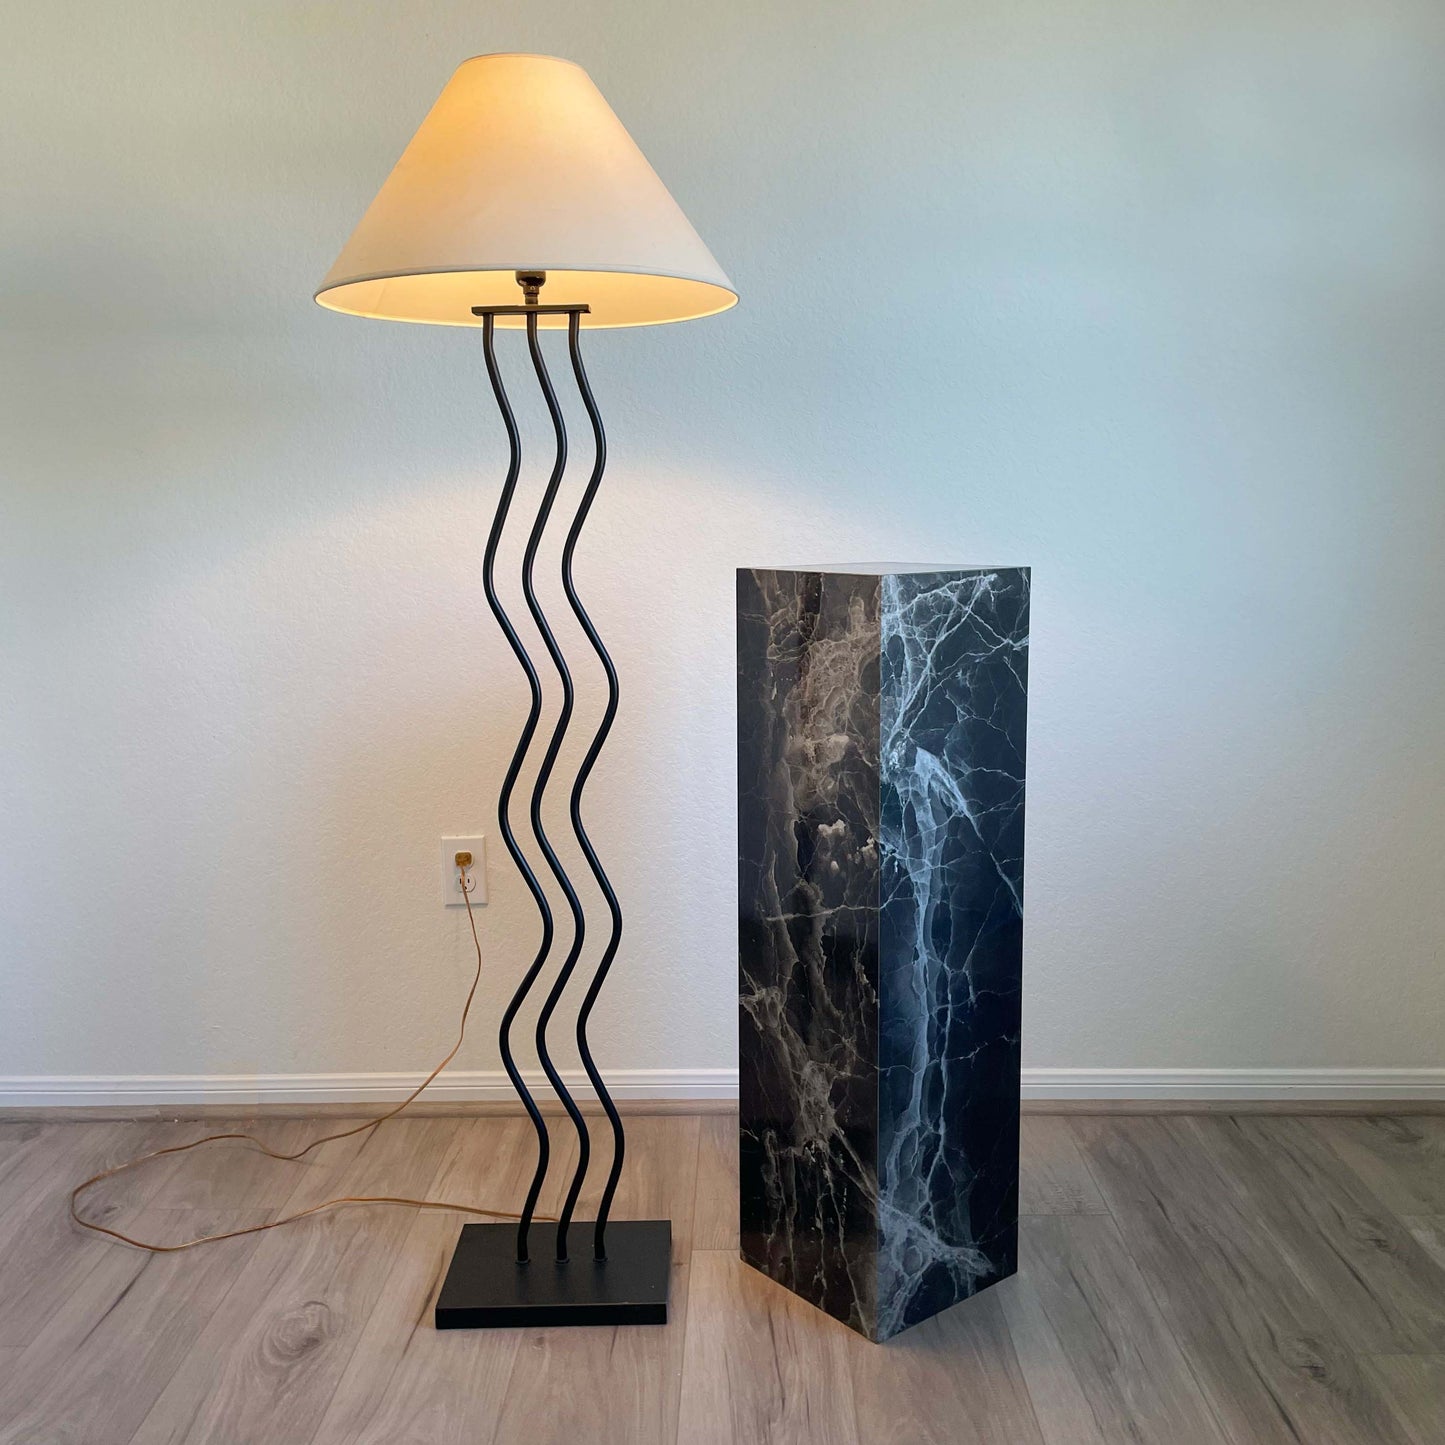 Vintage Faux Marble Pedestal: See Shipping Details